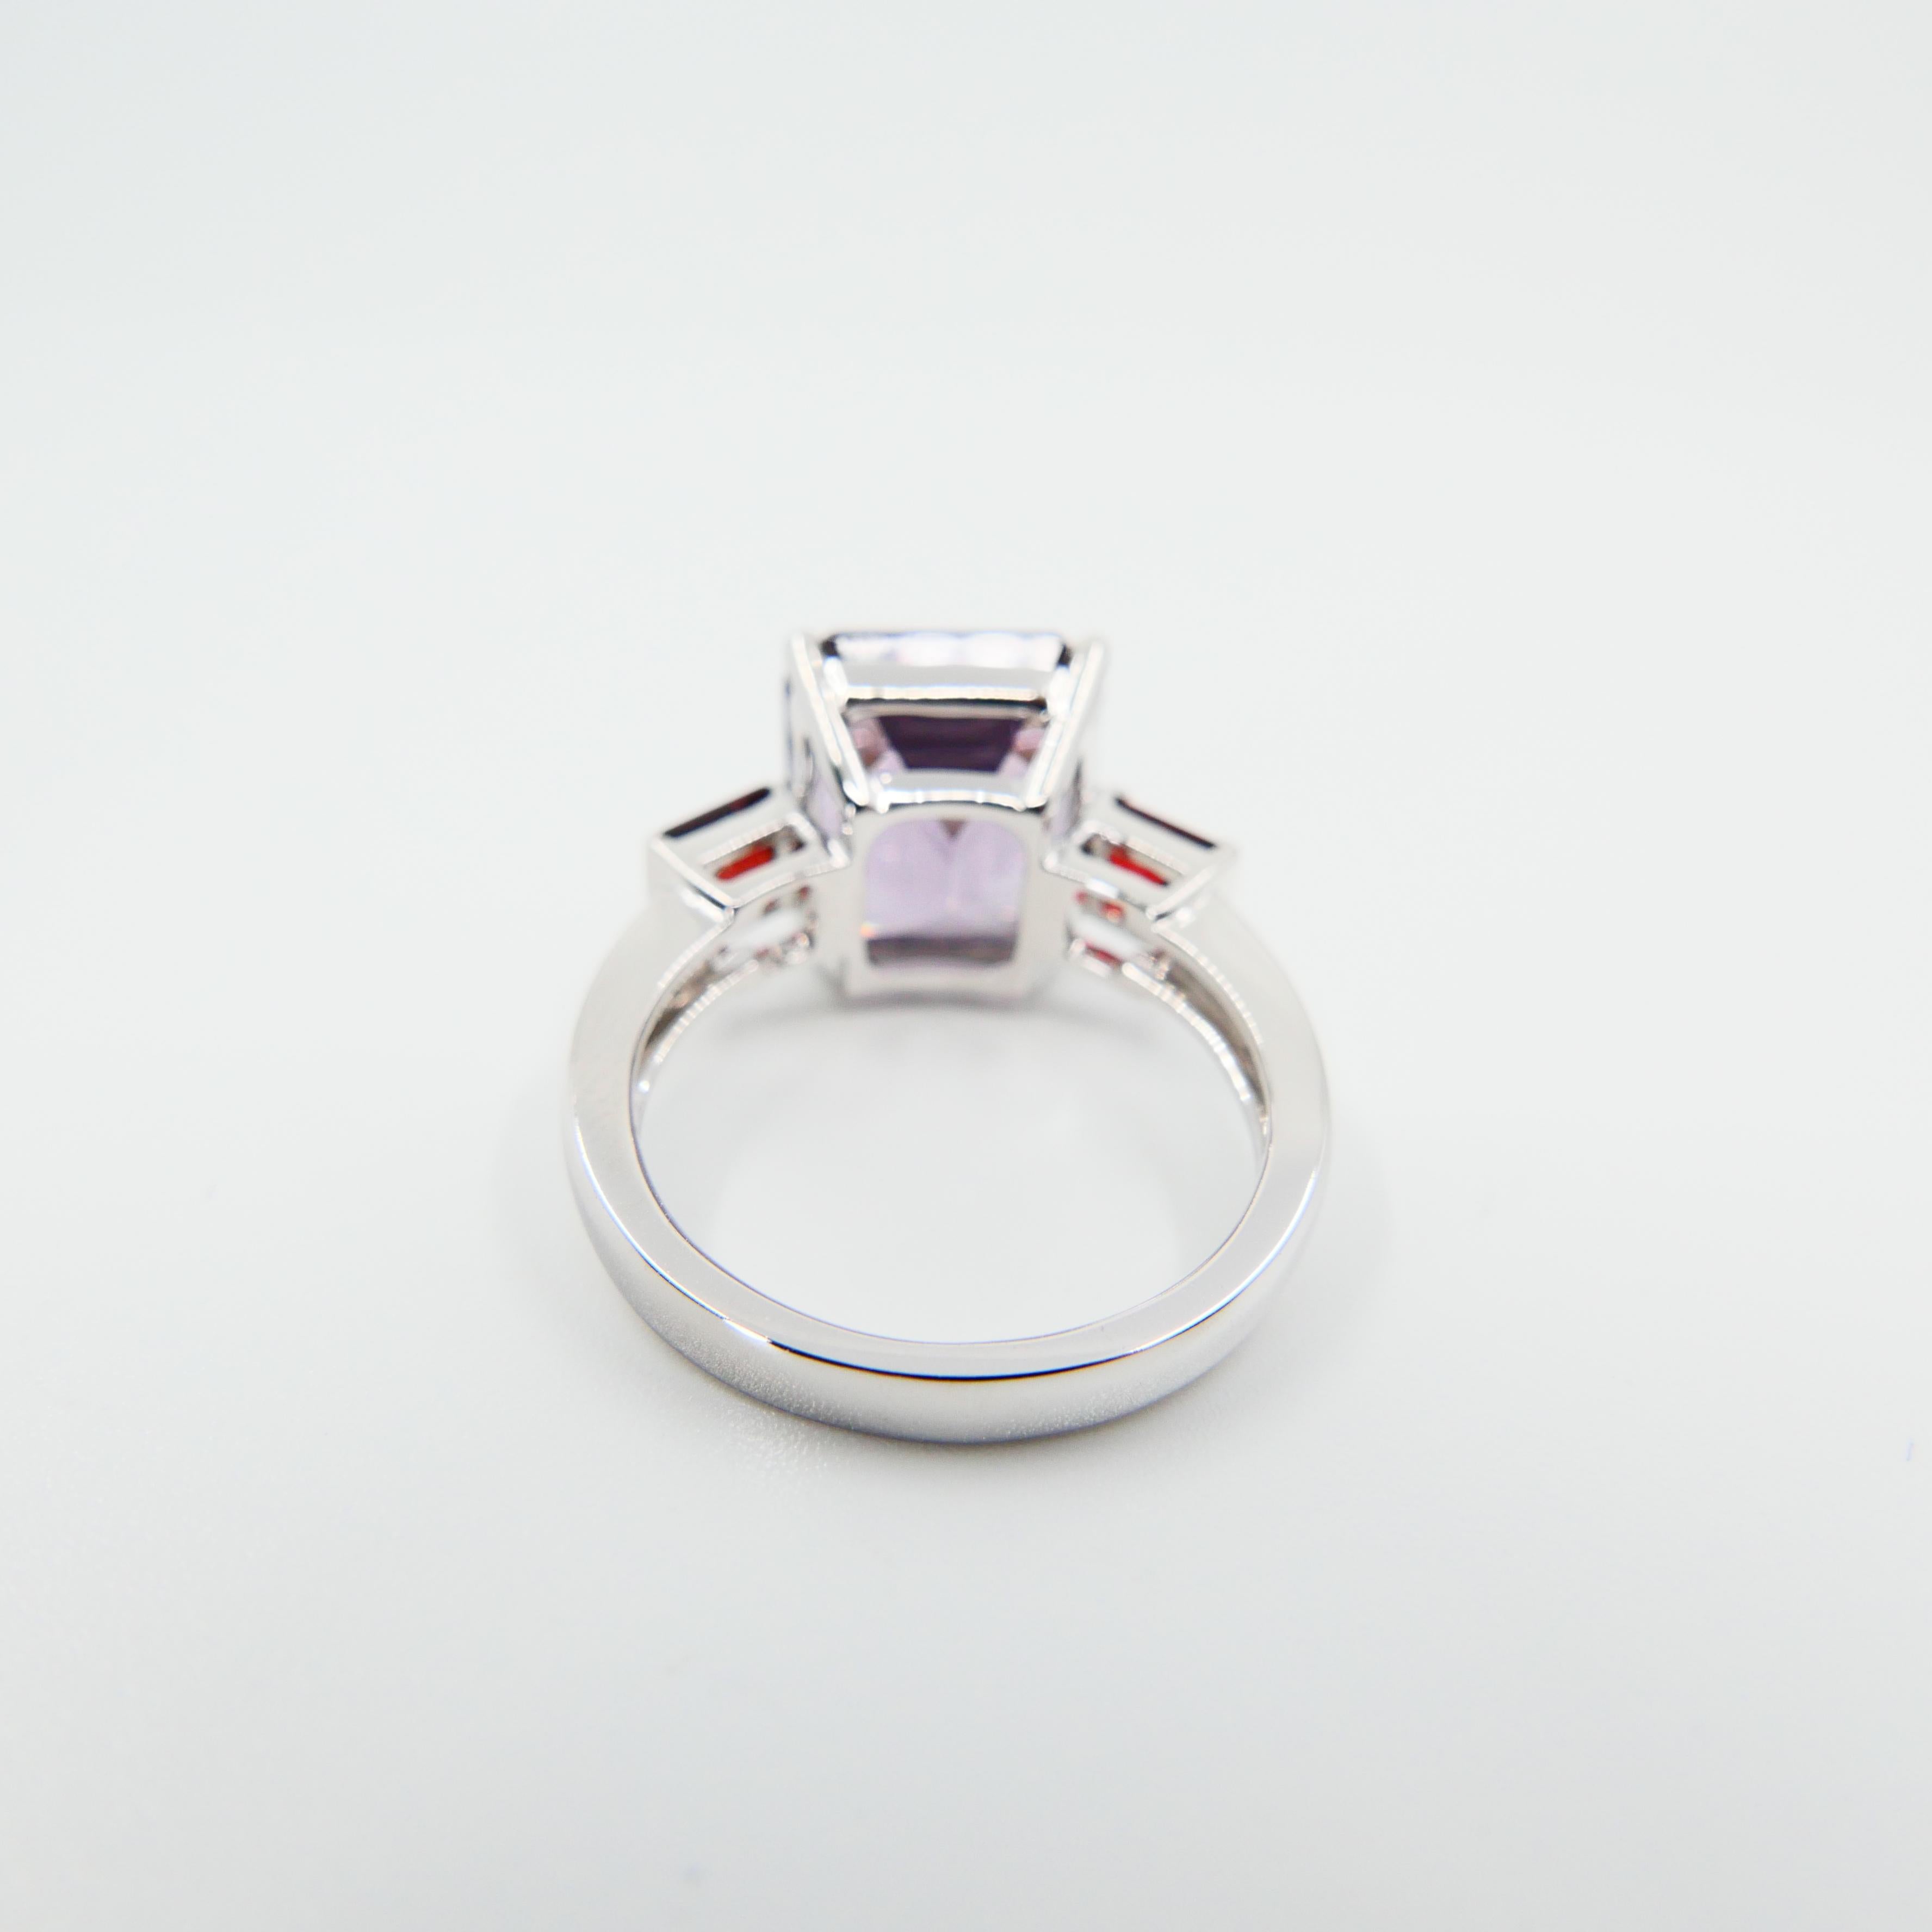 Natural 7.77 Cts Purple Spinel & 0.83 Carat Red Spinel Three-Stone Cocktail Ring 10